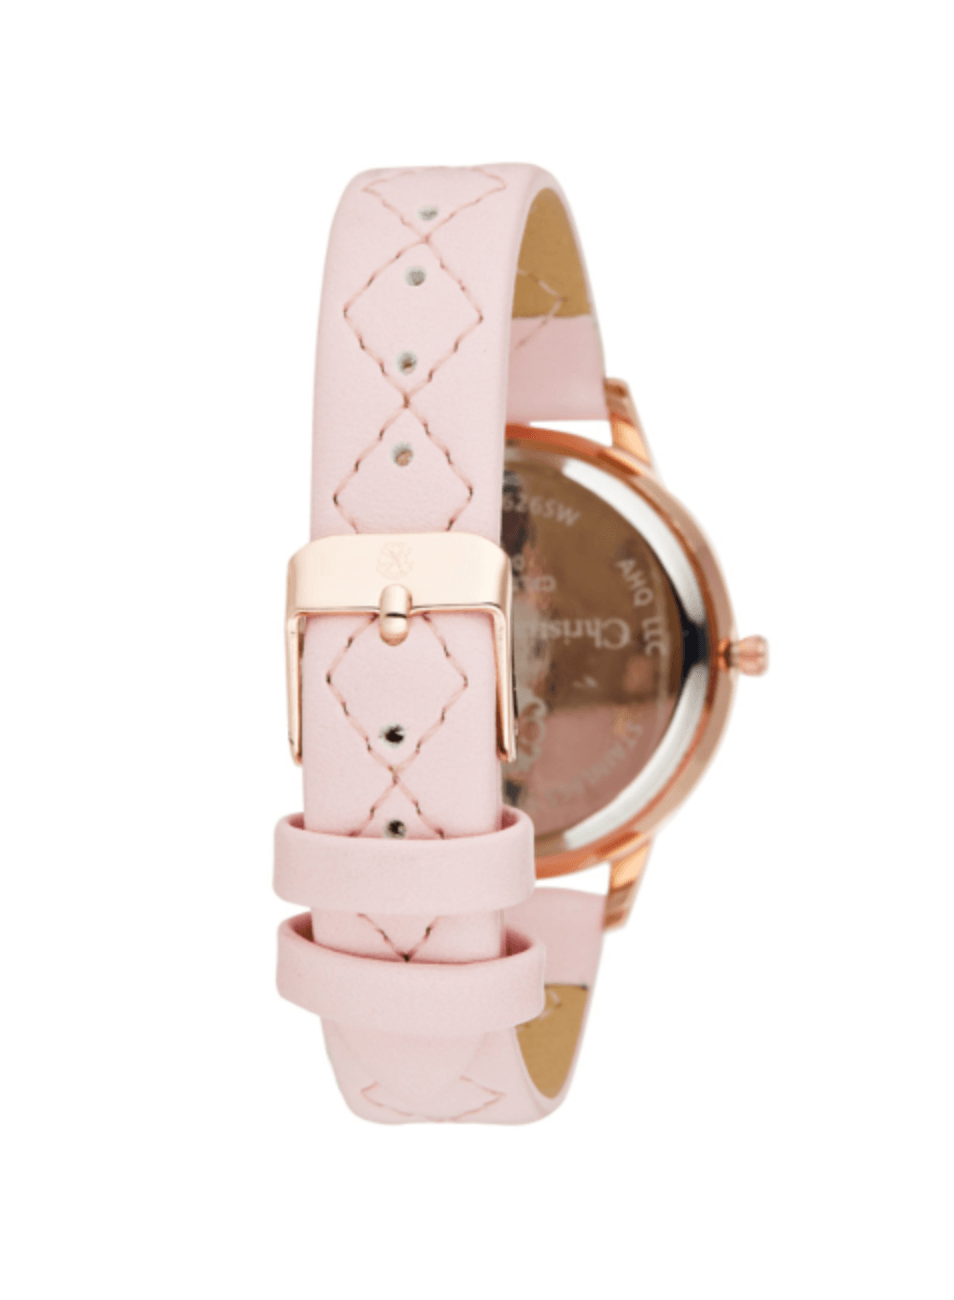 LEATHER QUARTZ WATCH - PINK AND GOLD - codressing